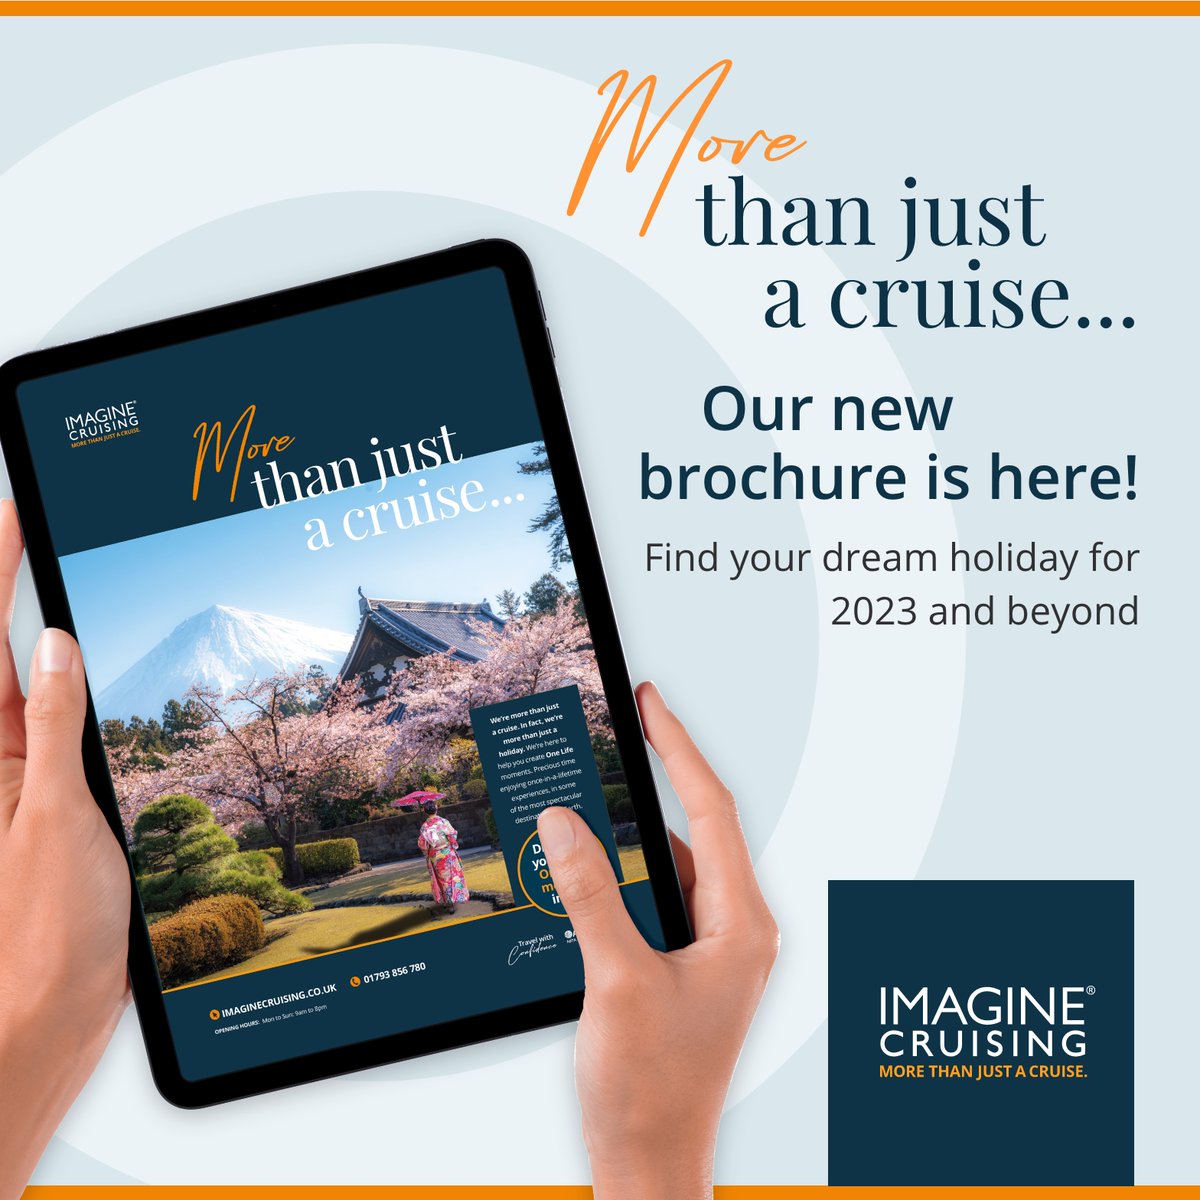 We’re more than just a cruise. In fact, we’re more than just a holiday. We’re here to help you create One Life moments. Find your next One Life moment here: bit.ly/ImagineCruisin…